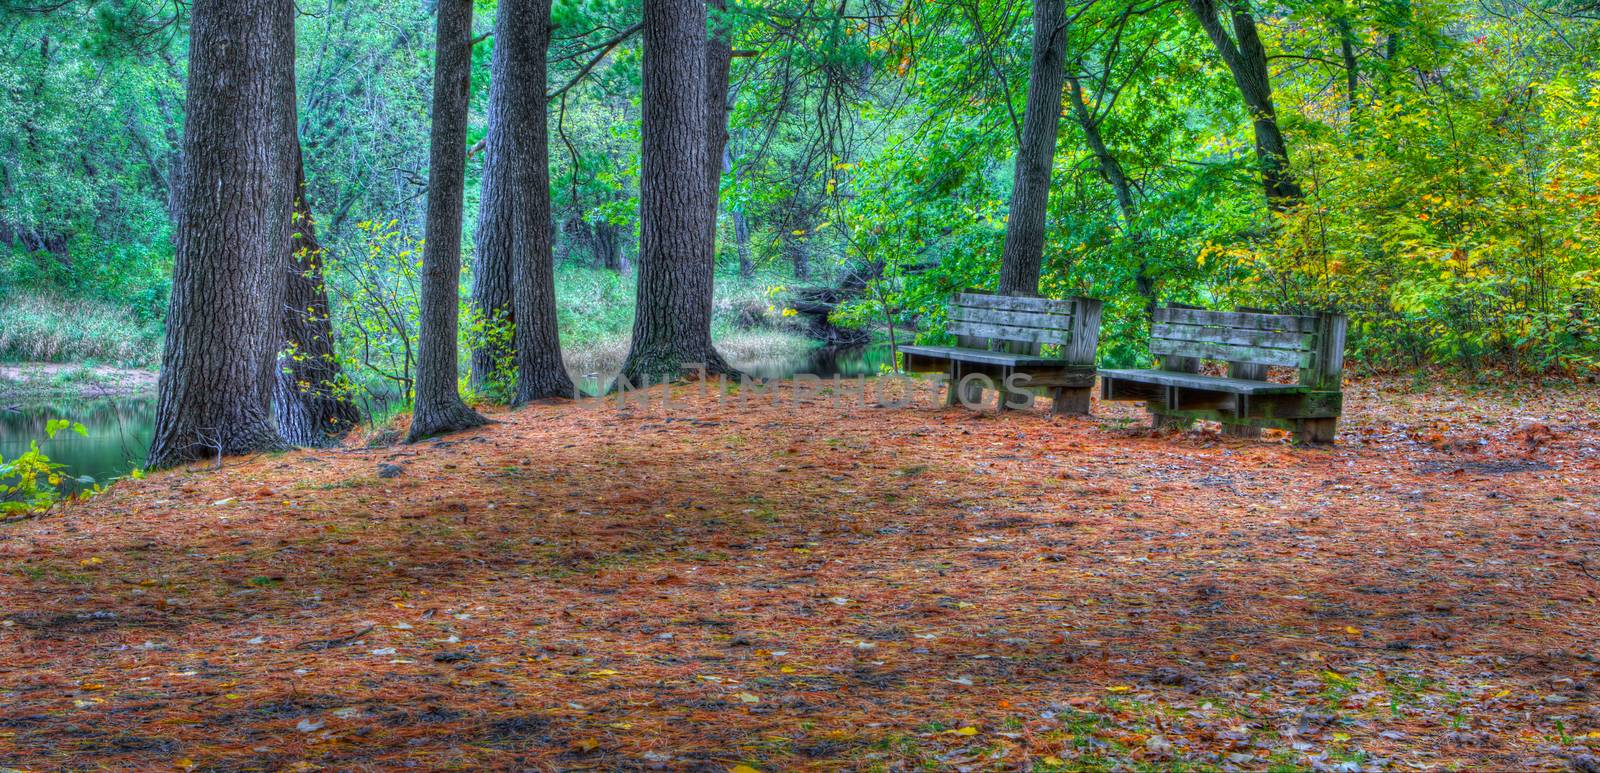 Bench and Fall Foliage by Coffee999